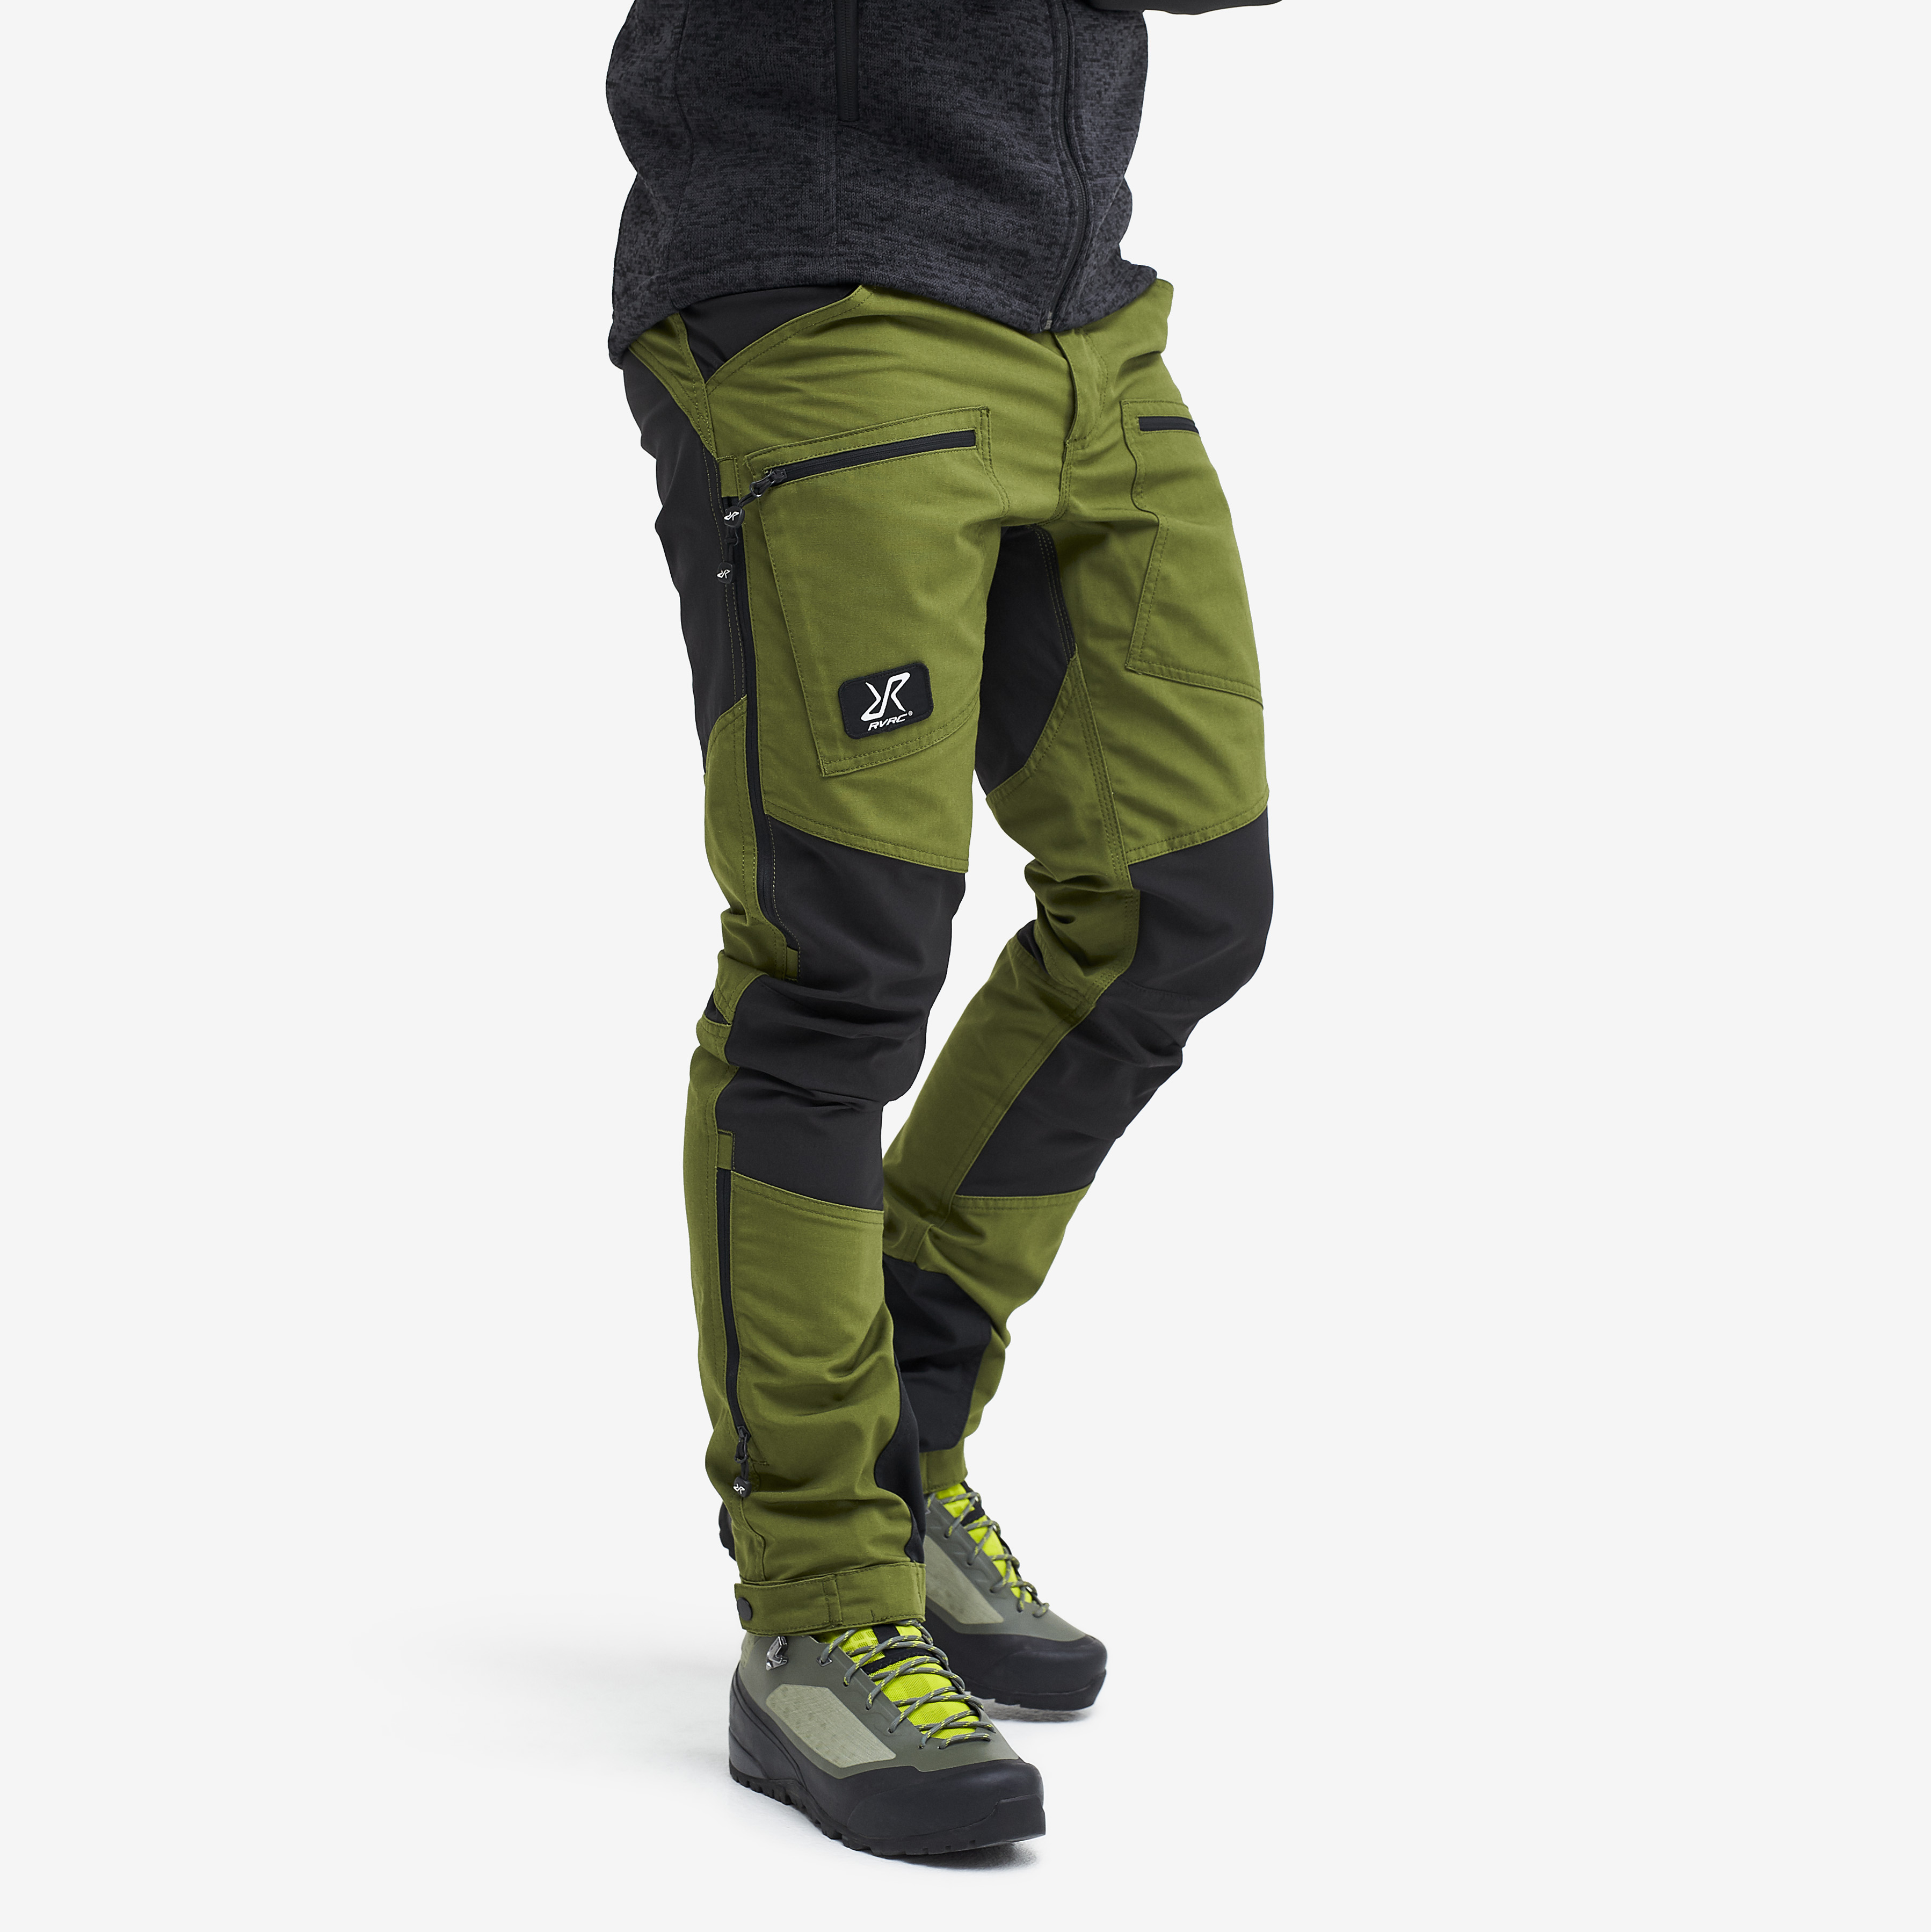 Nordwand Pro Rescue hiking pants for men in green